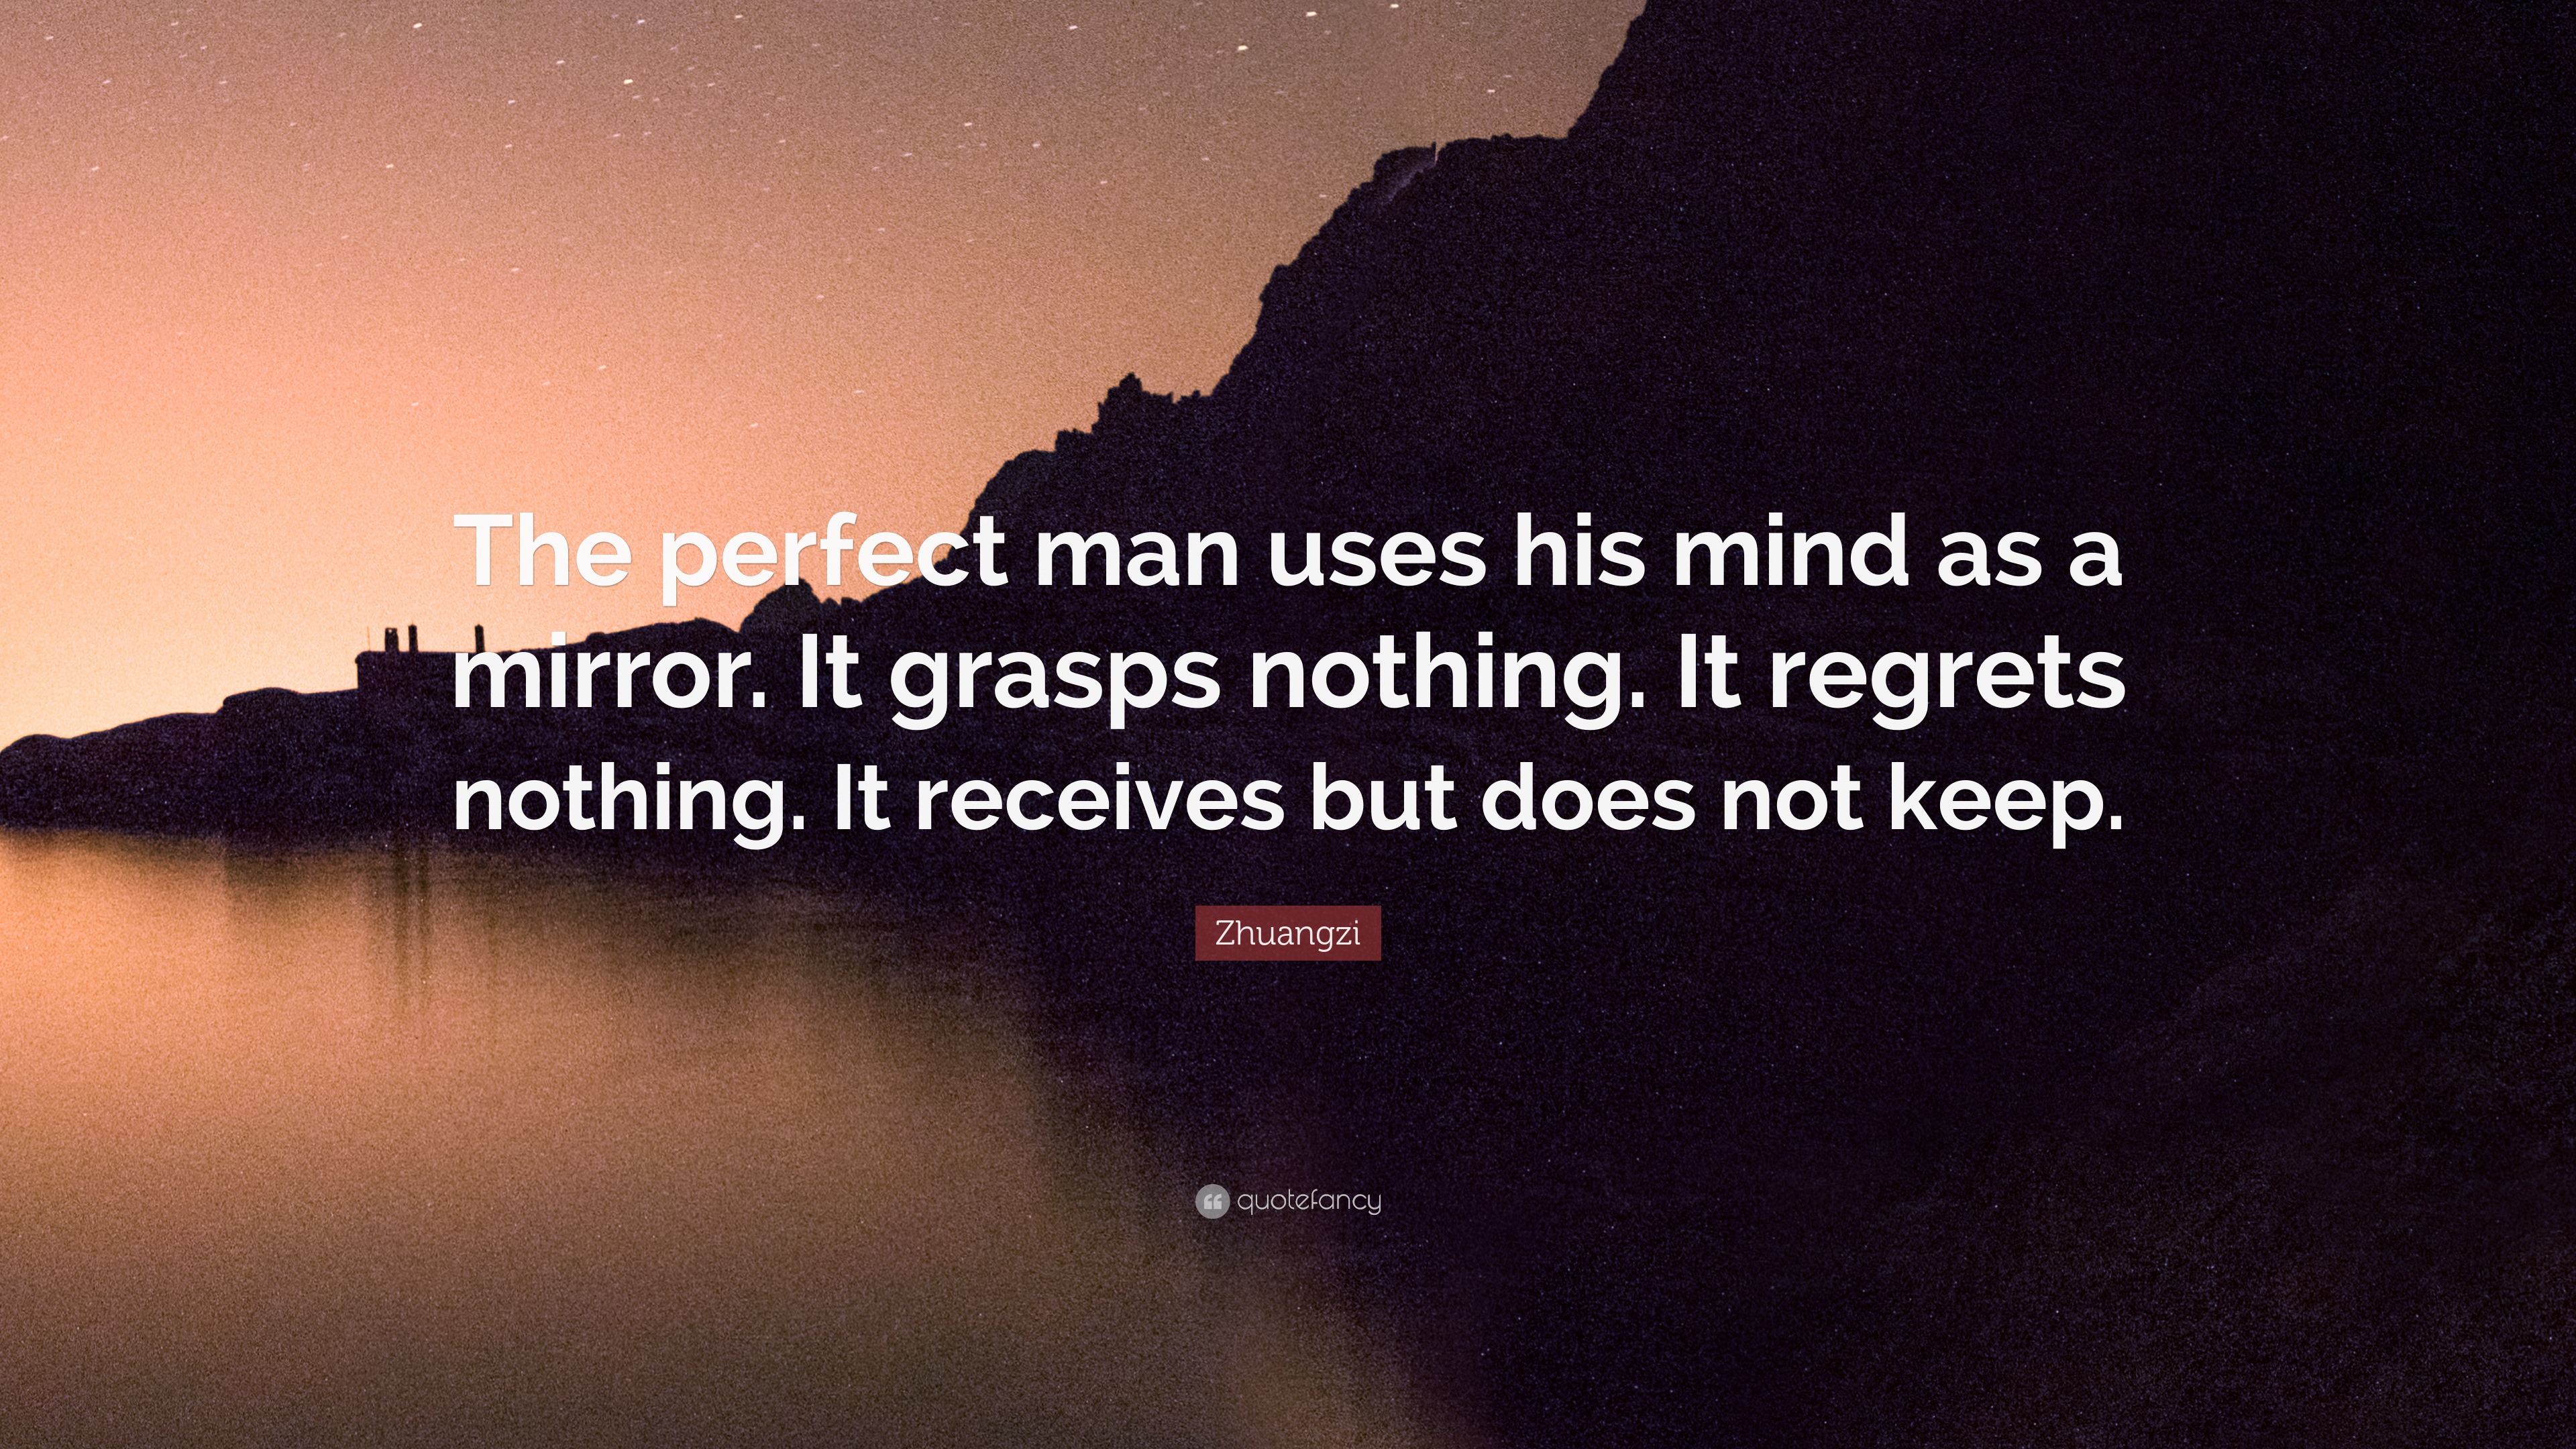 Zhuangzi Quote “The perfect man uses his mind as a mirror It grasps